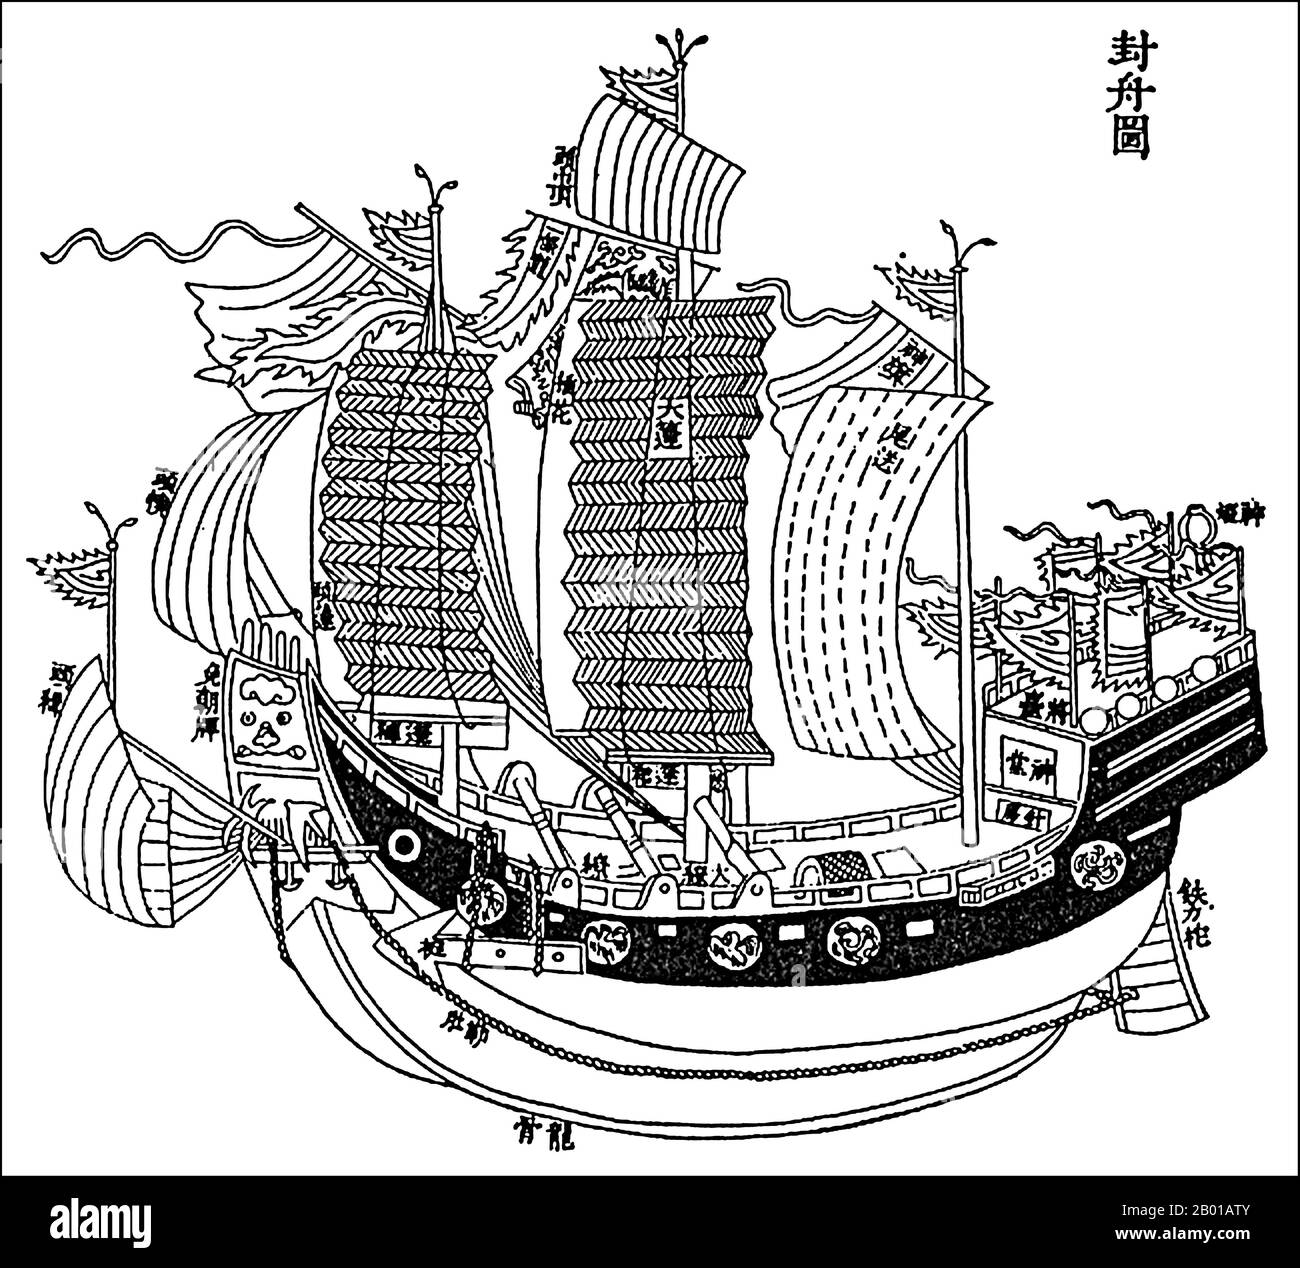 China: A Mongol/Yuan Dynasty war junk (Hai Fanchuan). Drawing from the book 'Liuqiu Guozhi Lue' (Annals of Ryukyu) by Zhou Huang (1714-1785), c. 1757-1759.  A junk is an ancient Chinese sailing vessel design still in use today. Junks were developed during the Han Dynasty (206 BCE – 220 CE) and were used as sea-going vessels as early as the 2nd century CE. They evolved in the later dynasties, and were used throughout Asia for extensive ocean voyages. They were found, and in lesser numbers are still found, throughout Southeast Asia and India, but primarily in China. Stock Photo